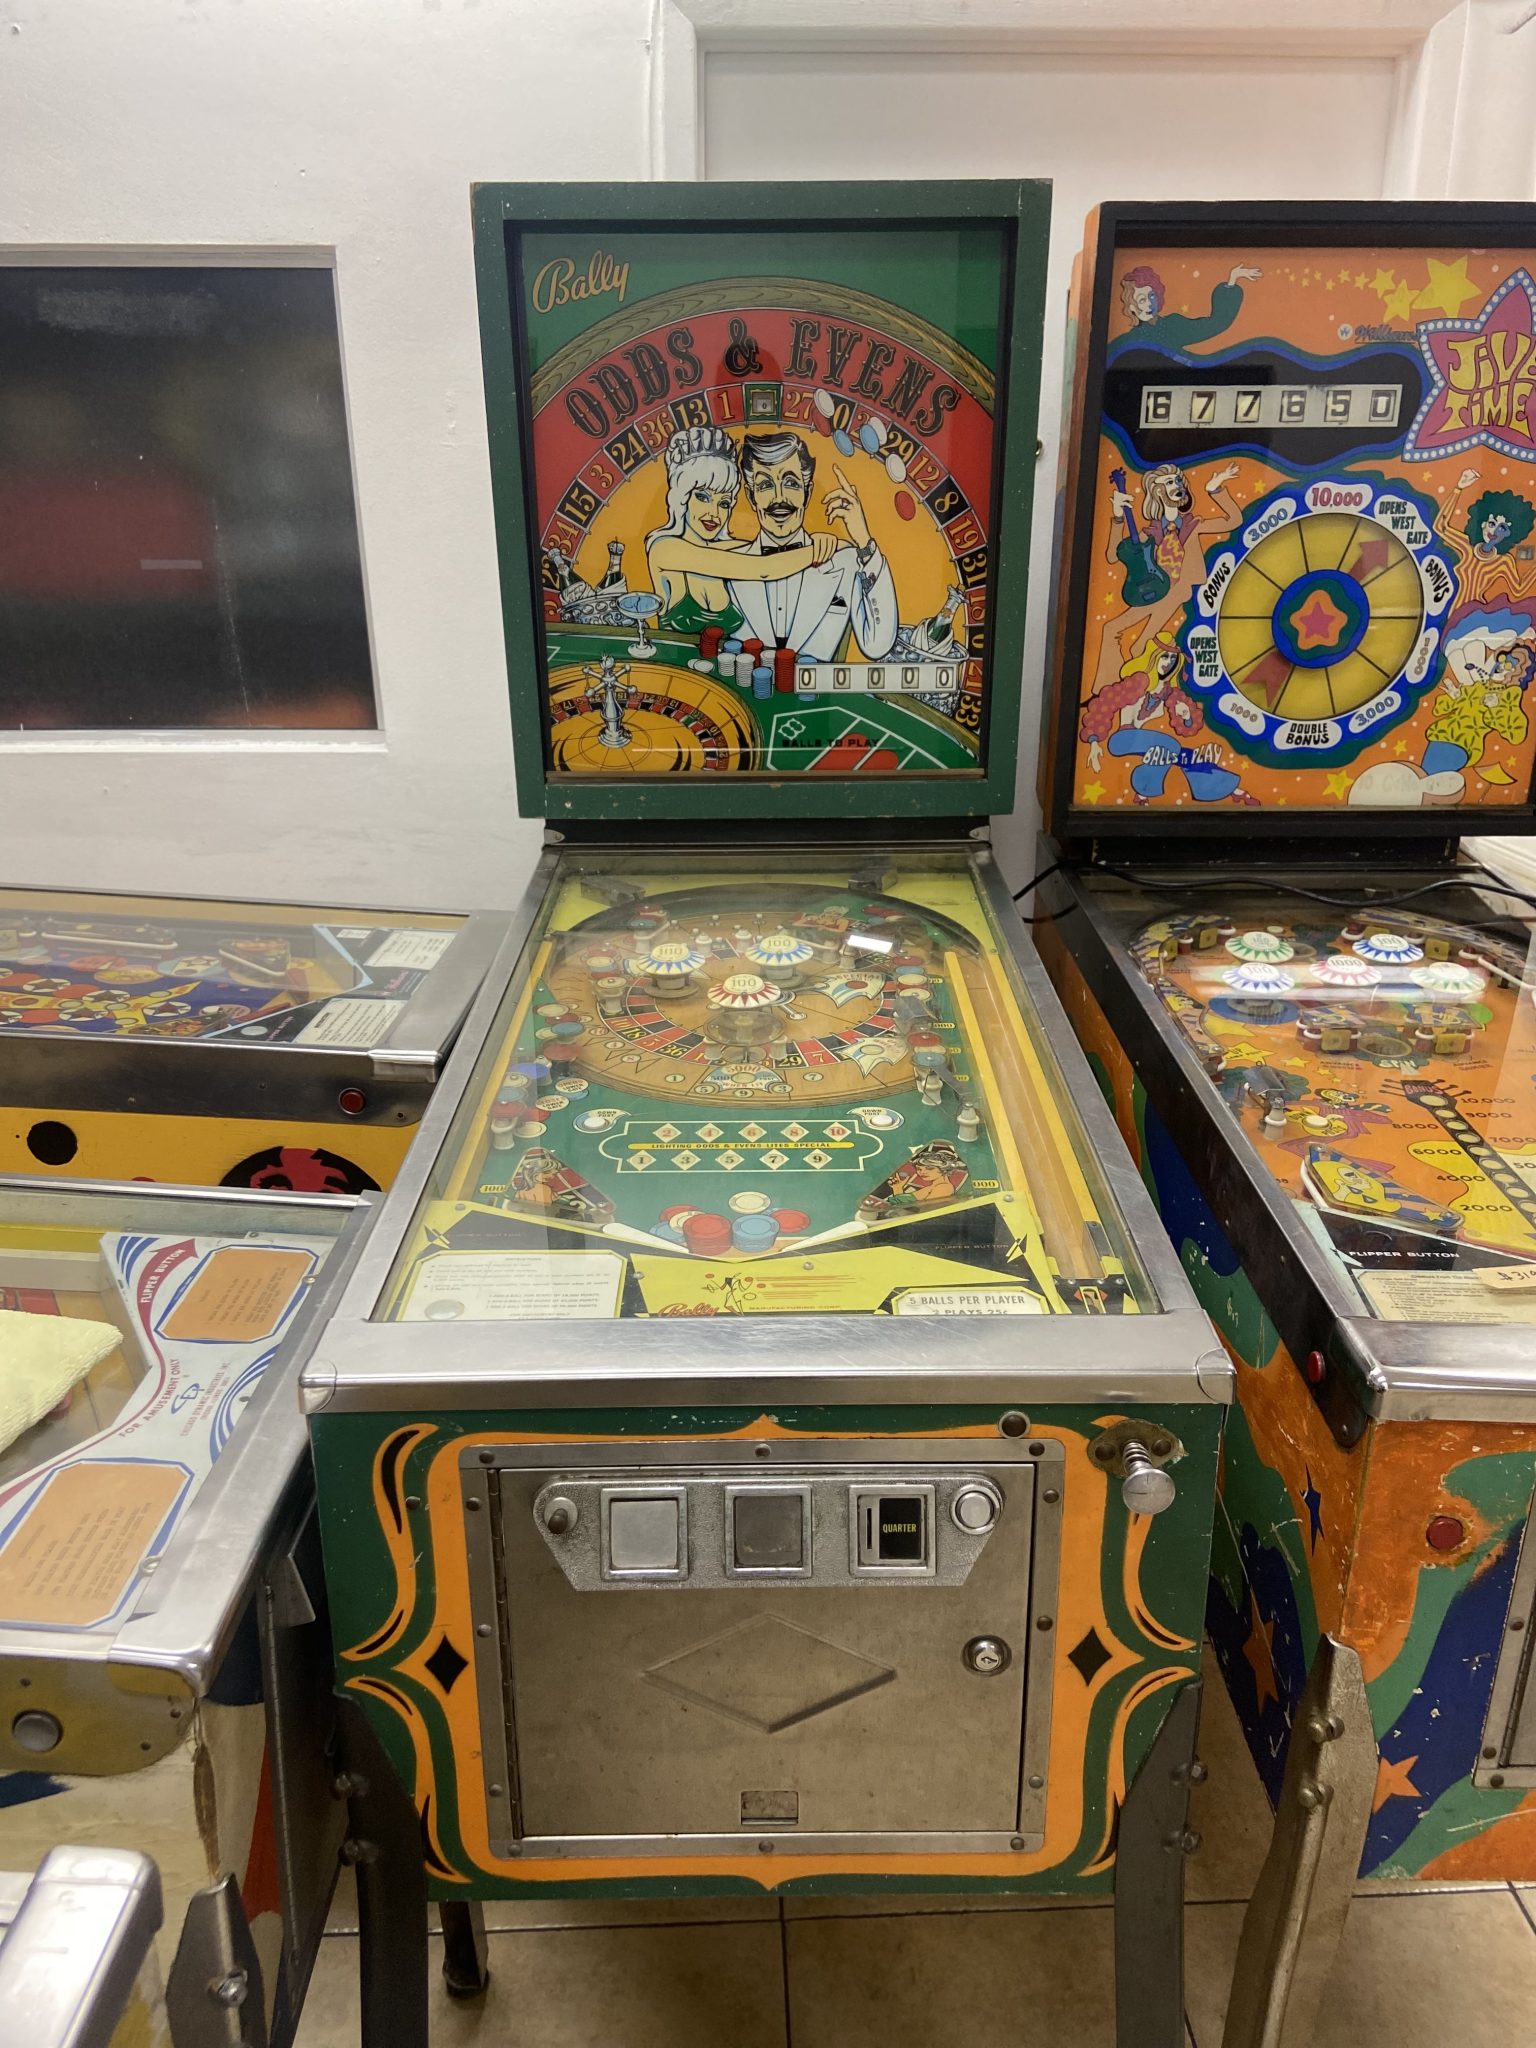 Odds and Evens Pinball Machine - Vintage Arcade Superstore